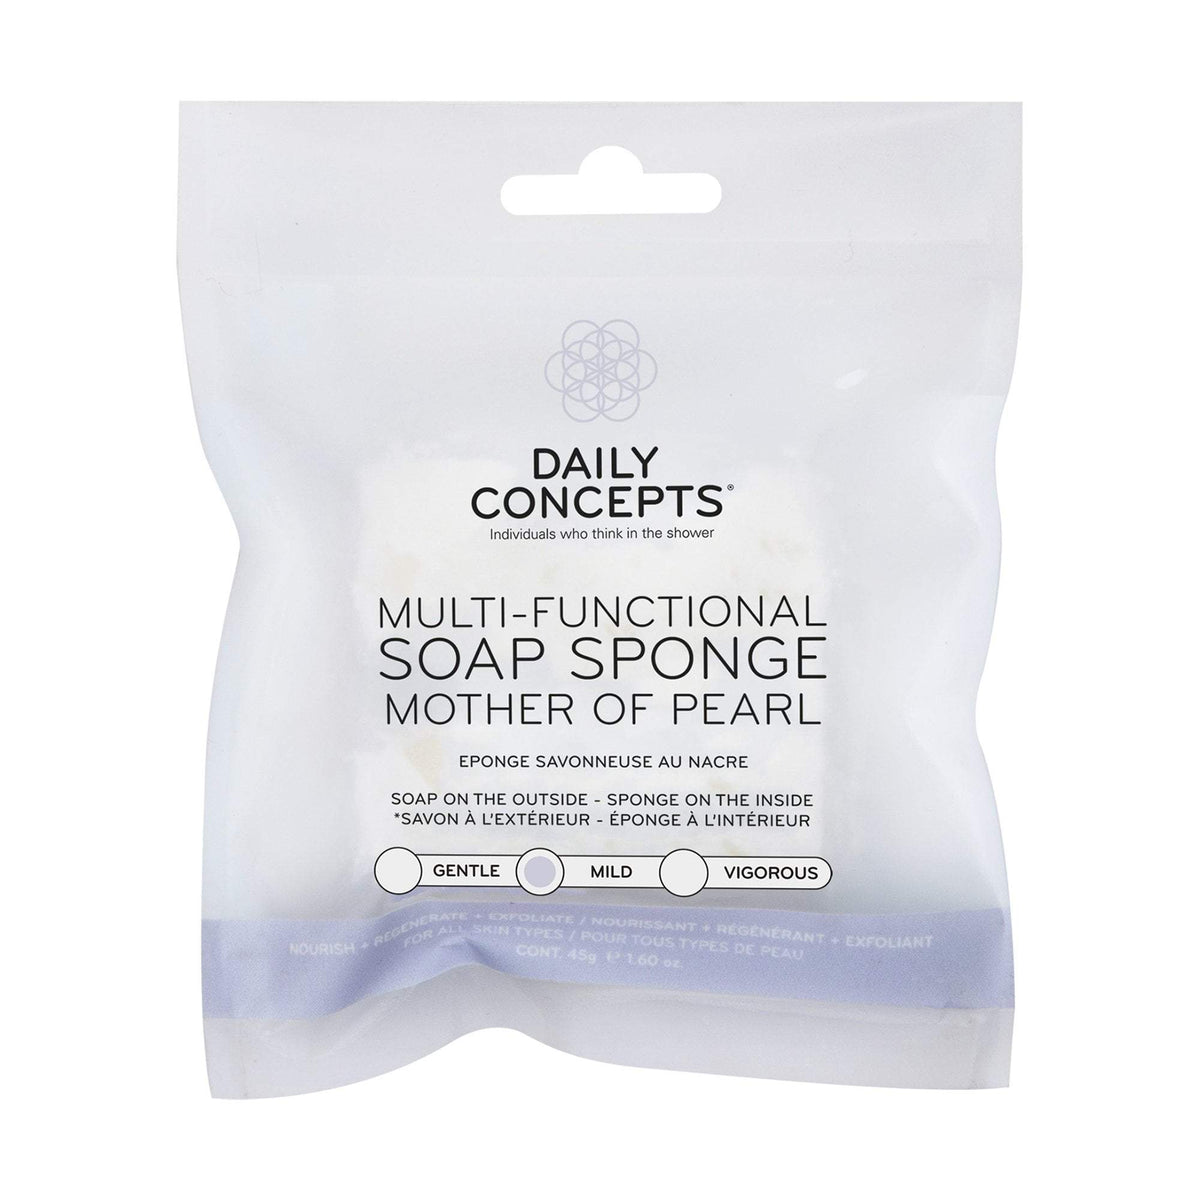 Daily Concepts Mother of Pearl Soap Sponge